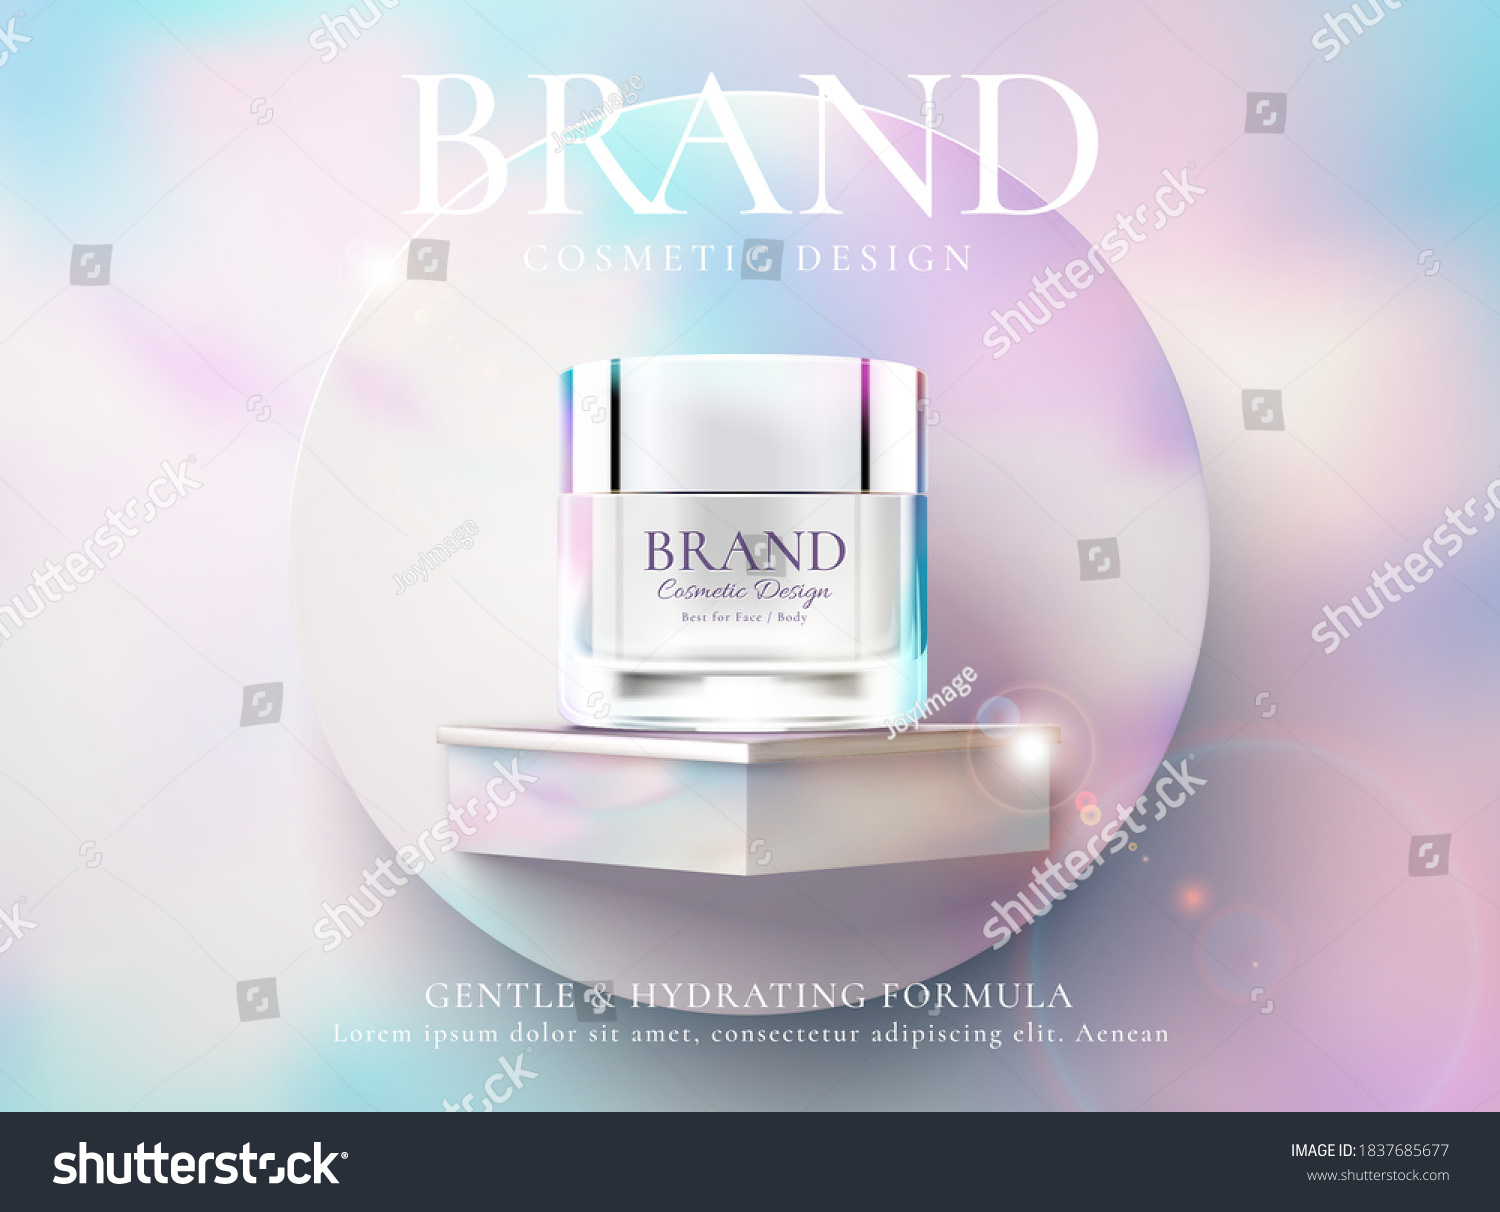 Cosmetic cream product ads against colorful background in 3d illustration. Beauty product advertisement banner. #1837685677